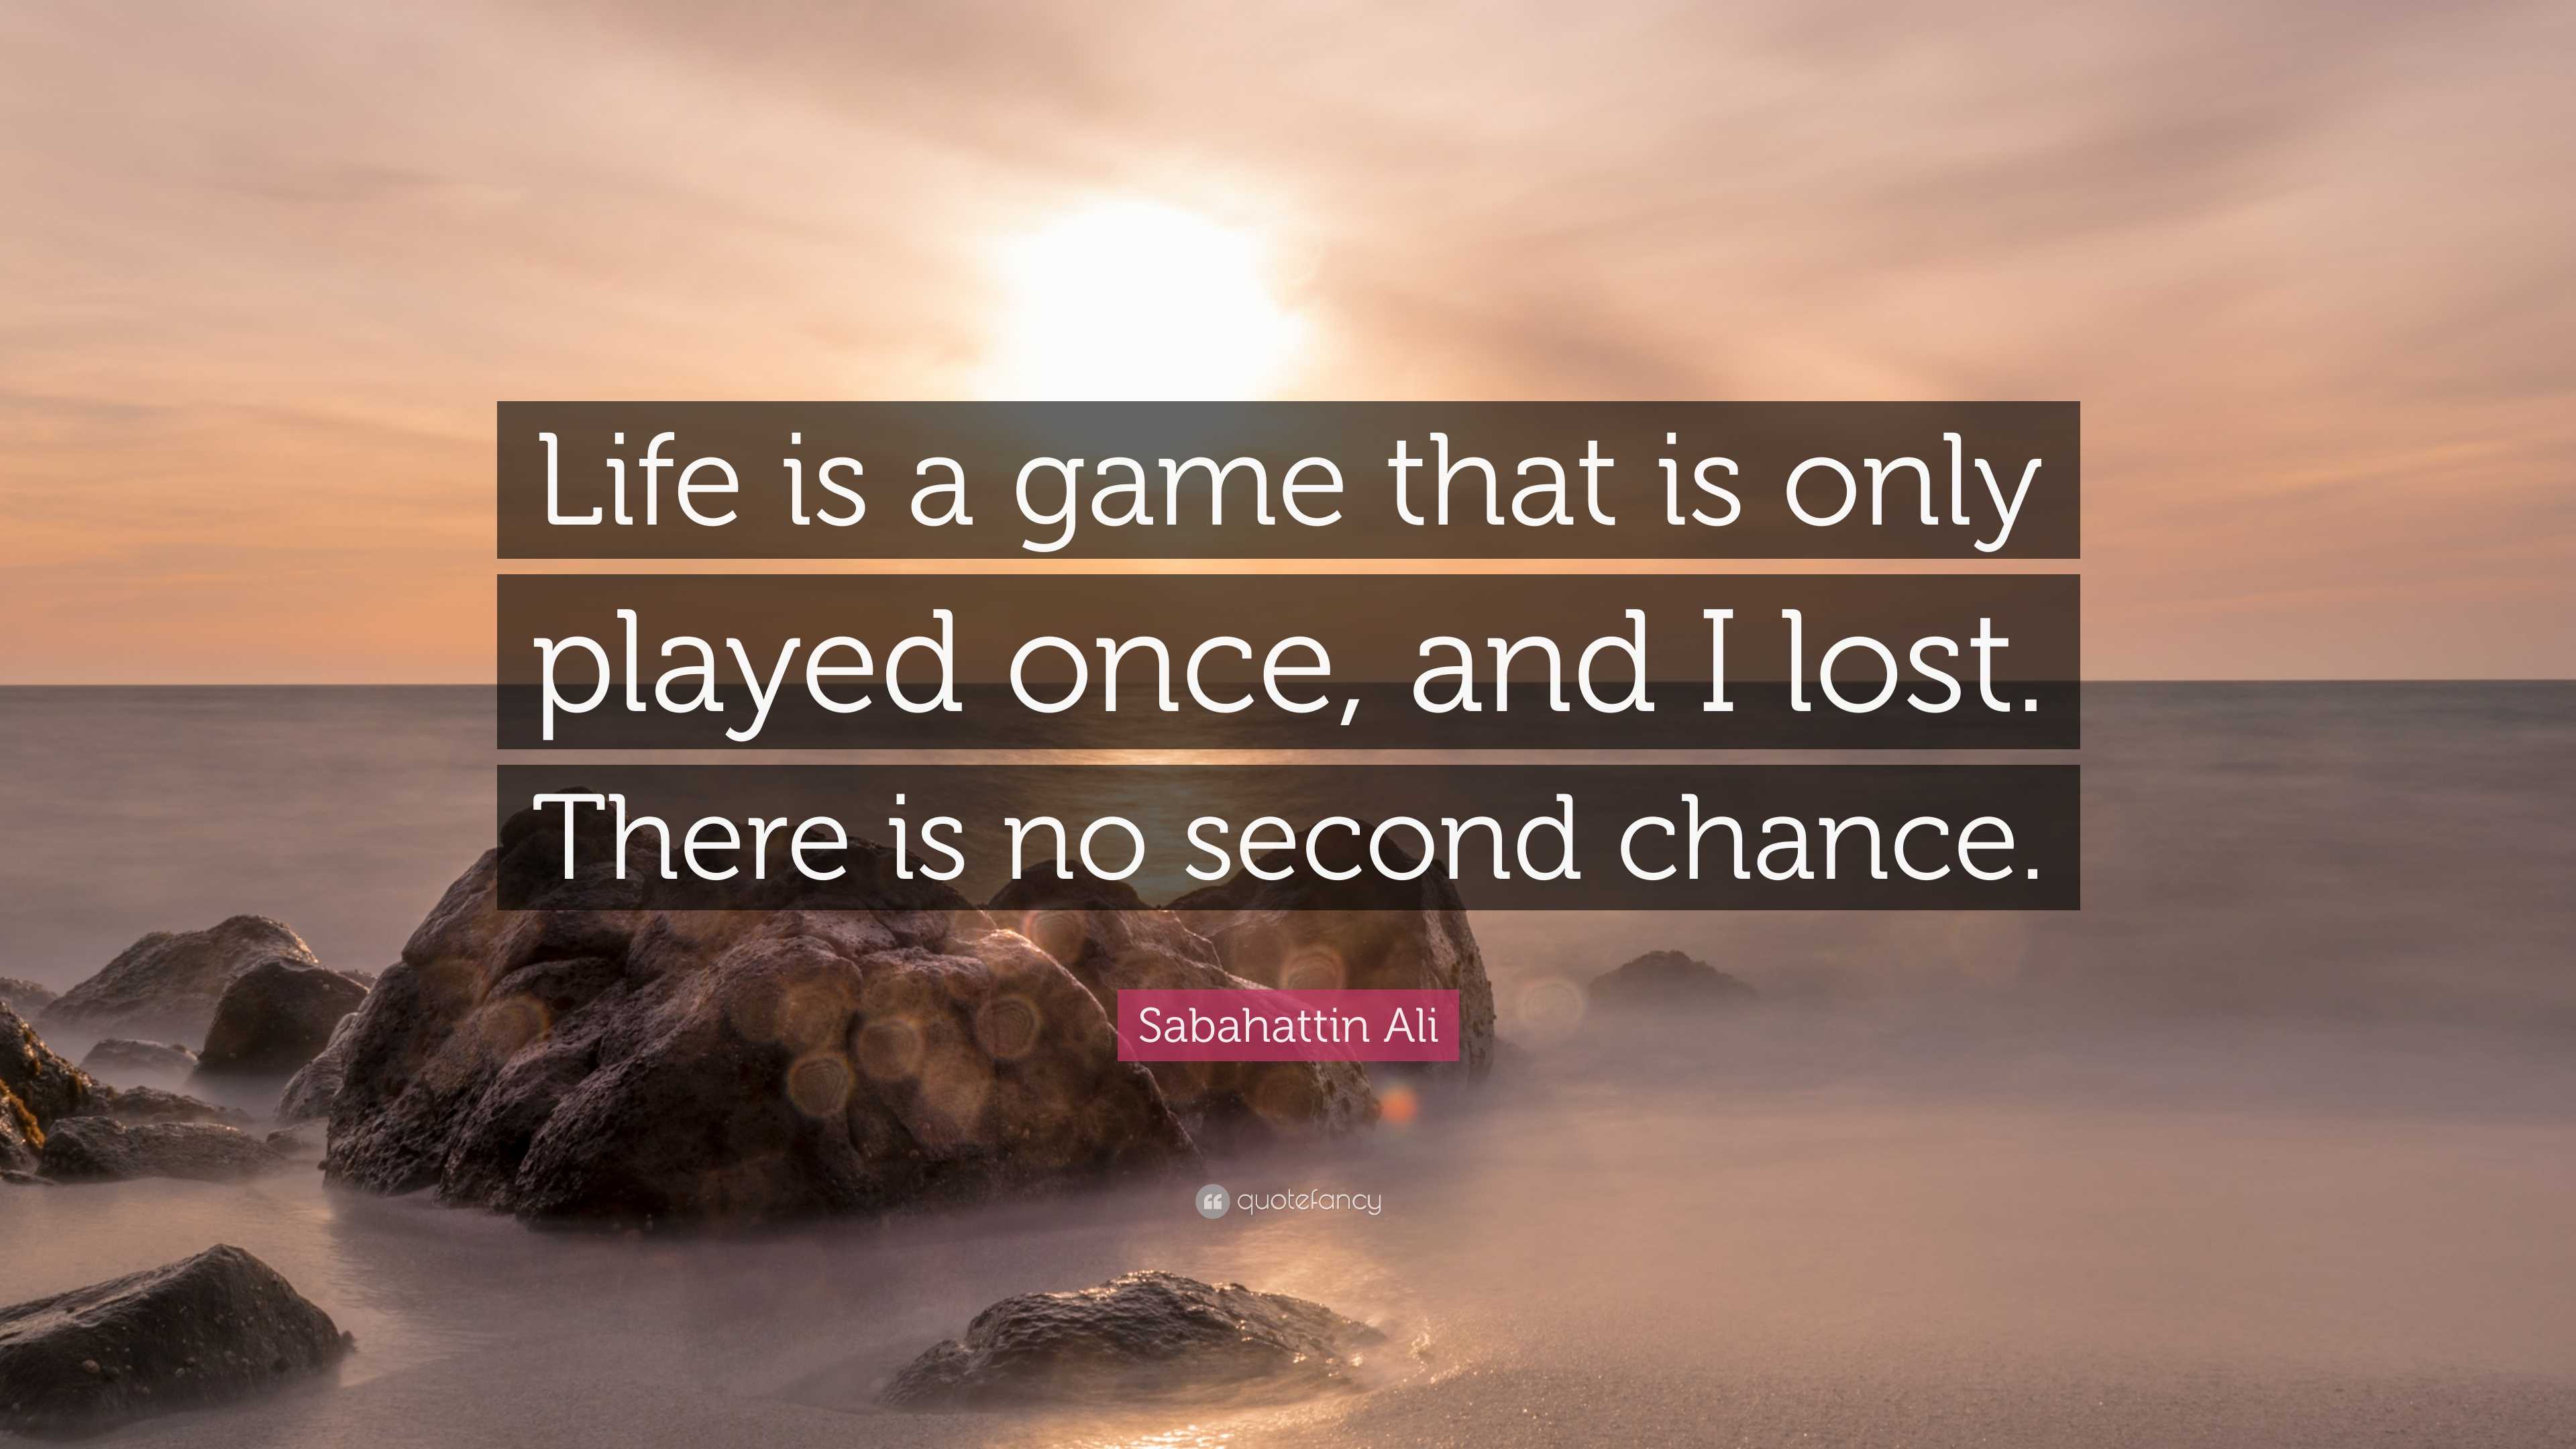 Life is a game.. 🎮 - Quota of Quotes - Quora